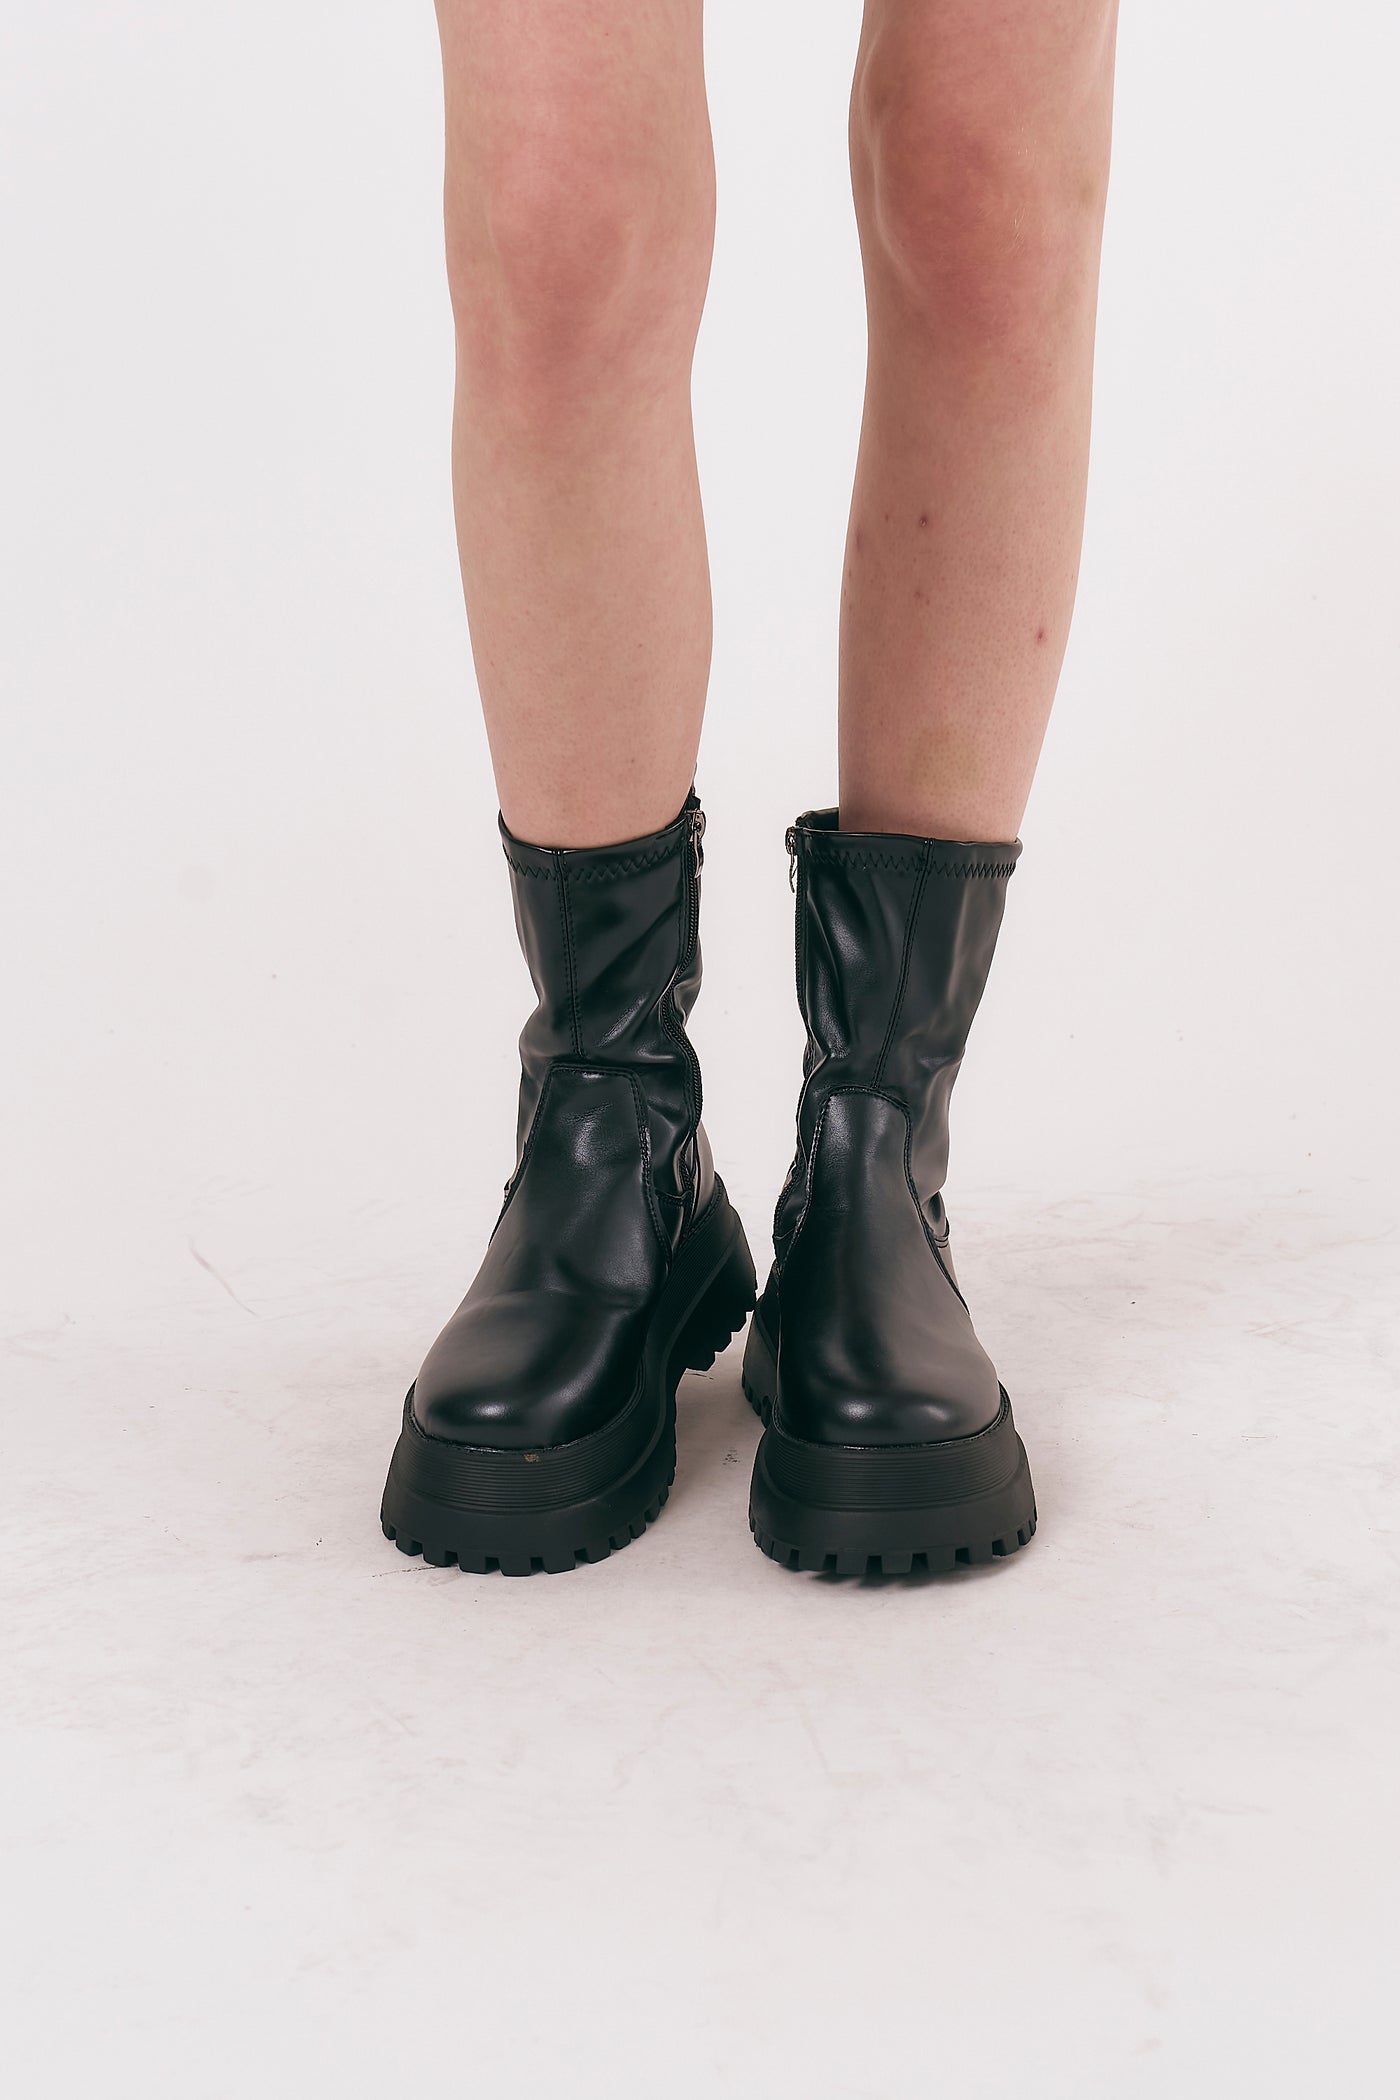 storets.com Andy Chunky Calf Boots